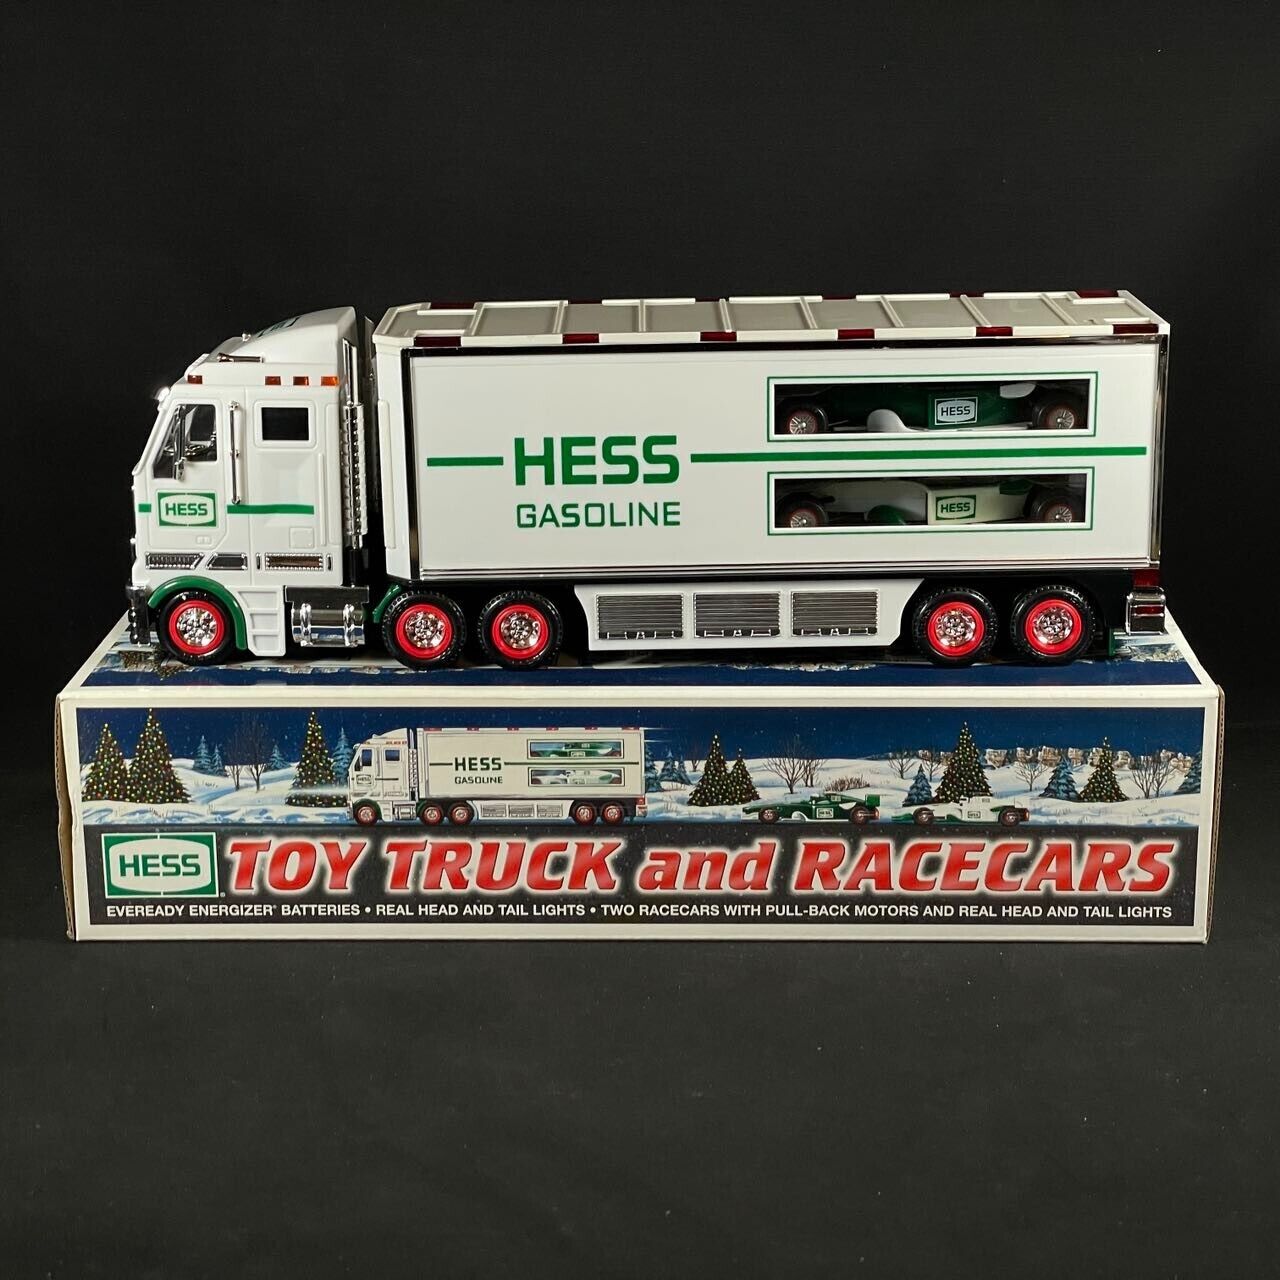 2003 Hess Toy Truck and Racecars - Collectible - NEW IN ORIGINAL BOX